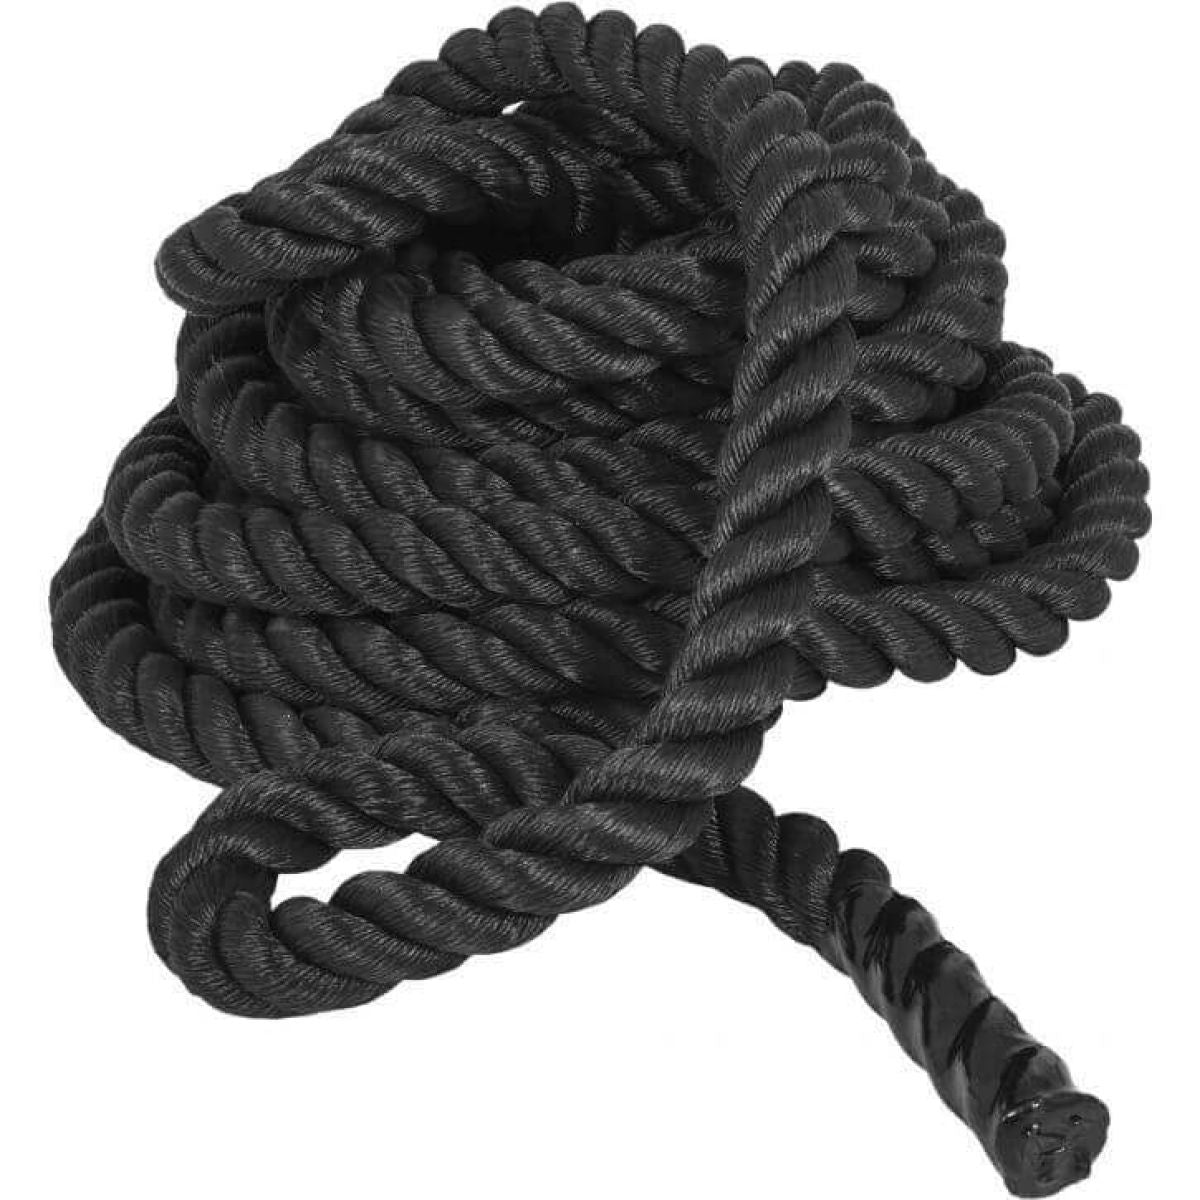 Power Rope 38 mm